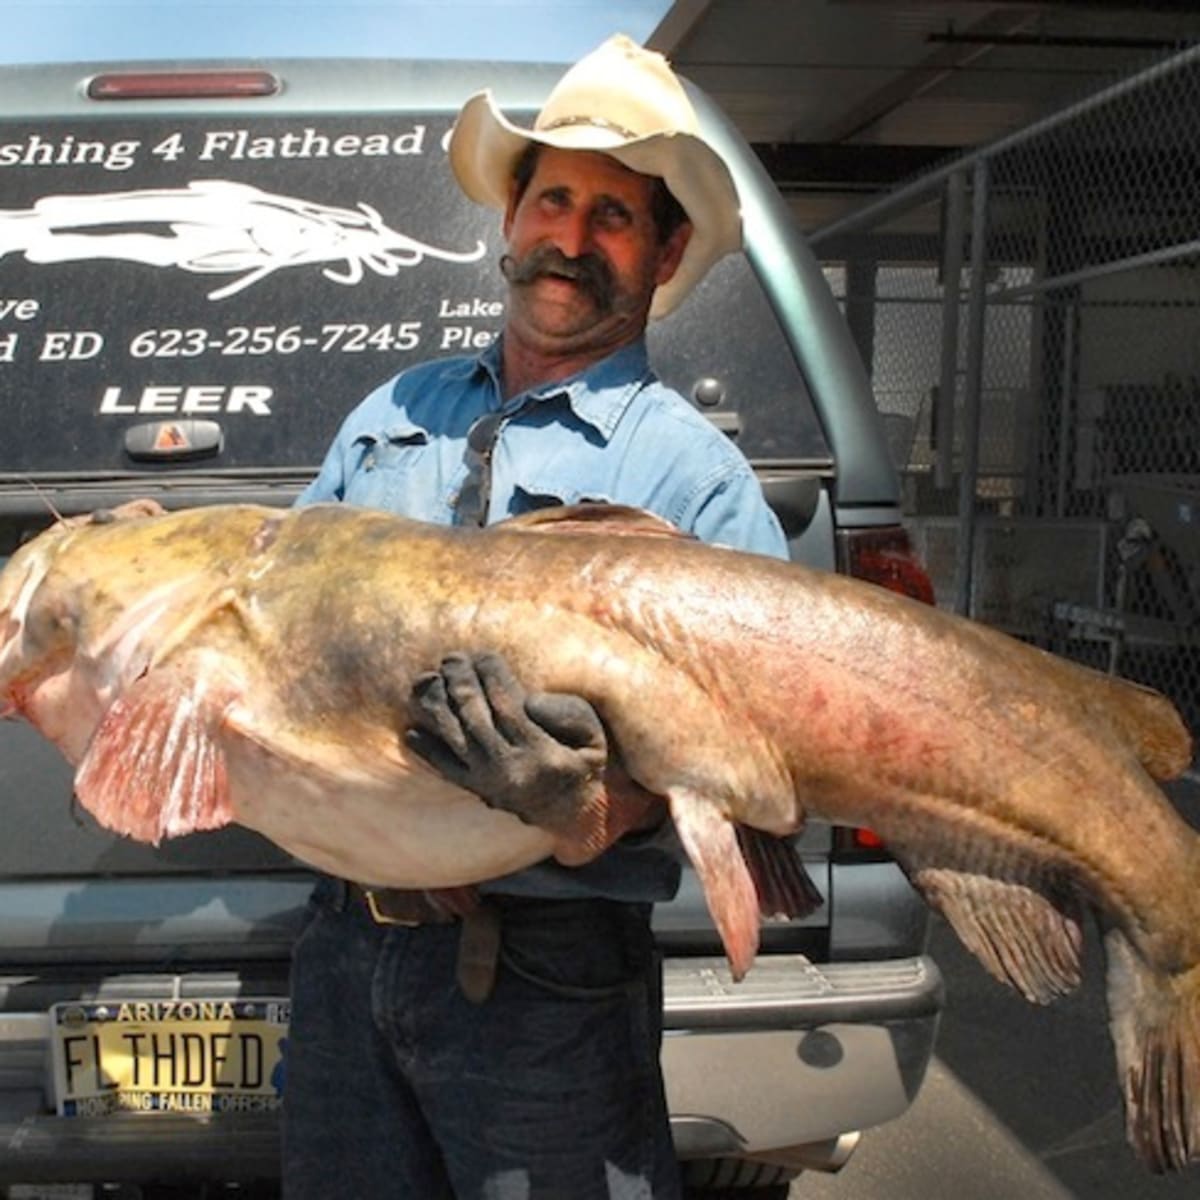 Angler's 76.52-pound flathead is heaviest fish ever landed in Arizona -  Men's Journal